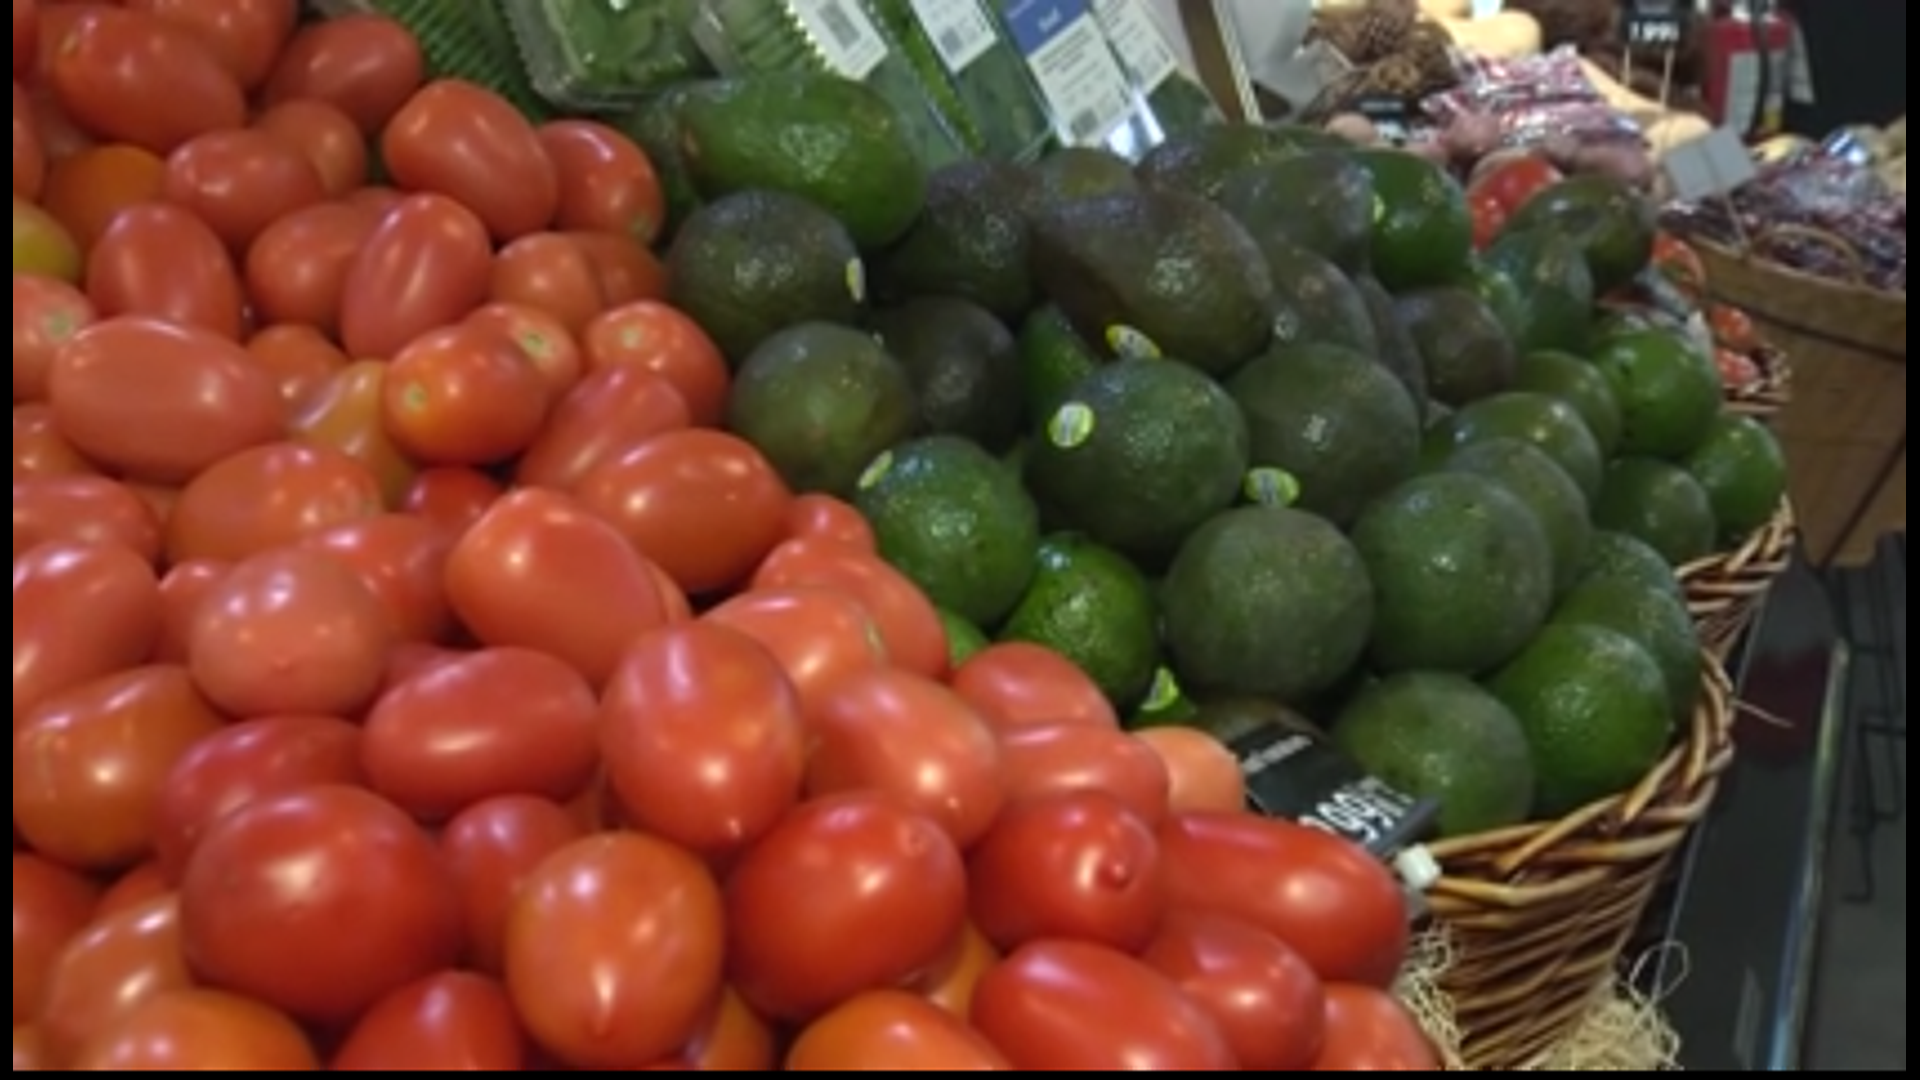 One Macon neighborhood could have a new, affordable grocery store within walking distance.